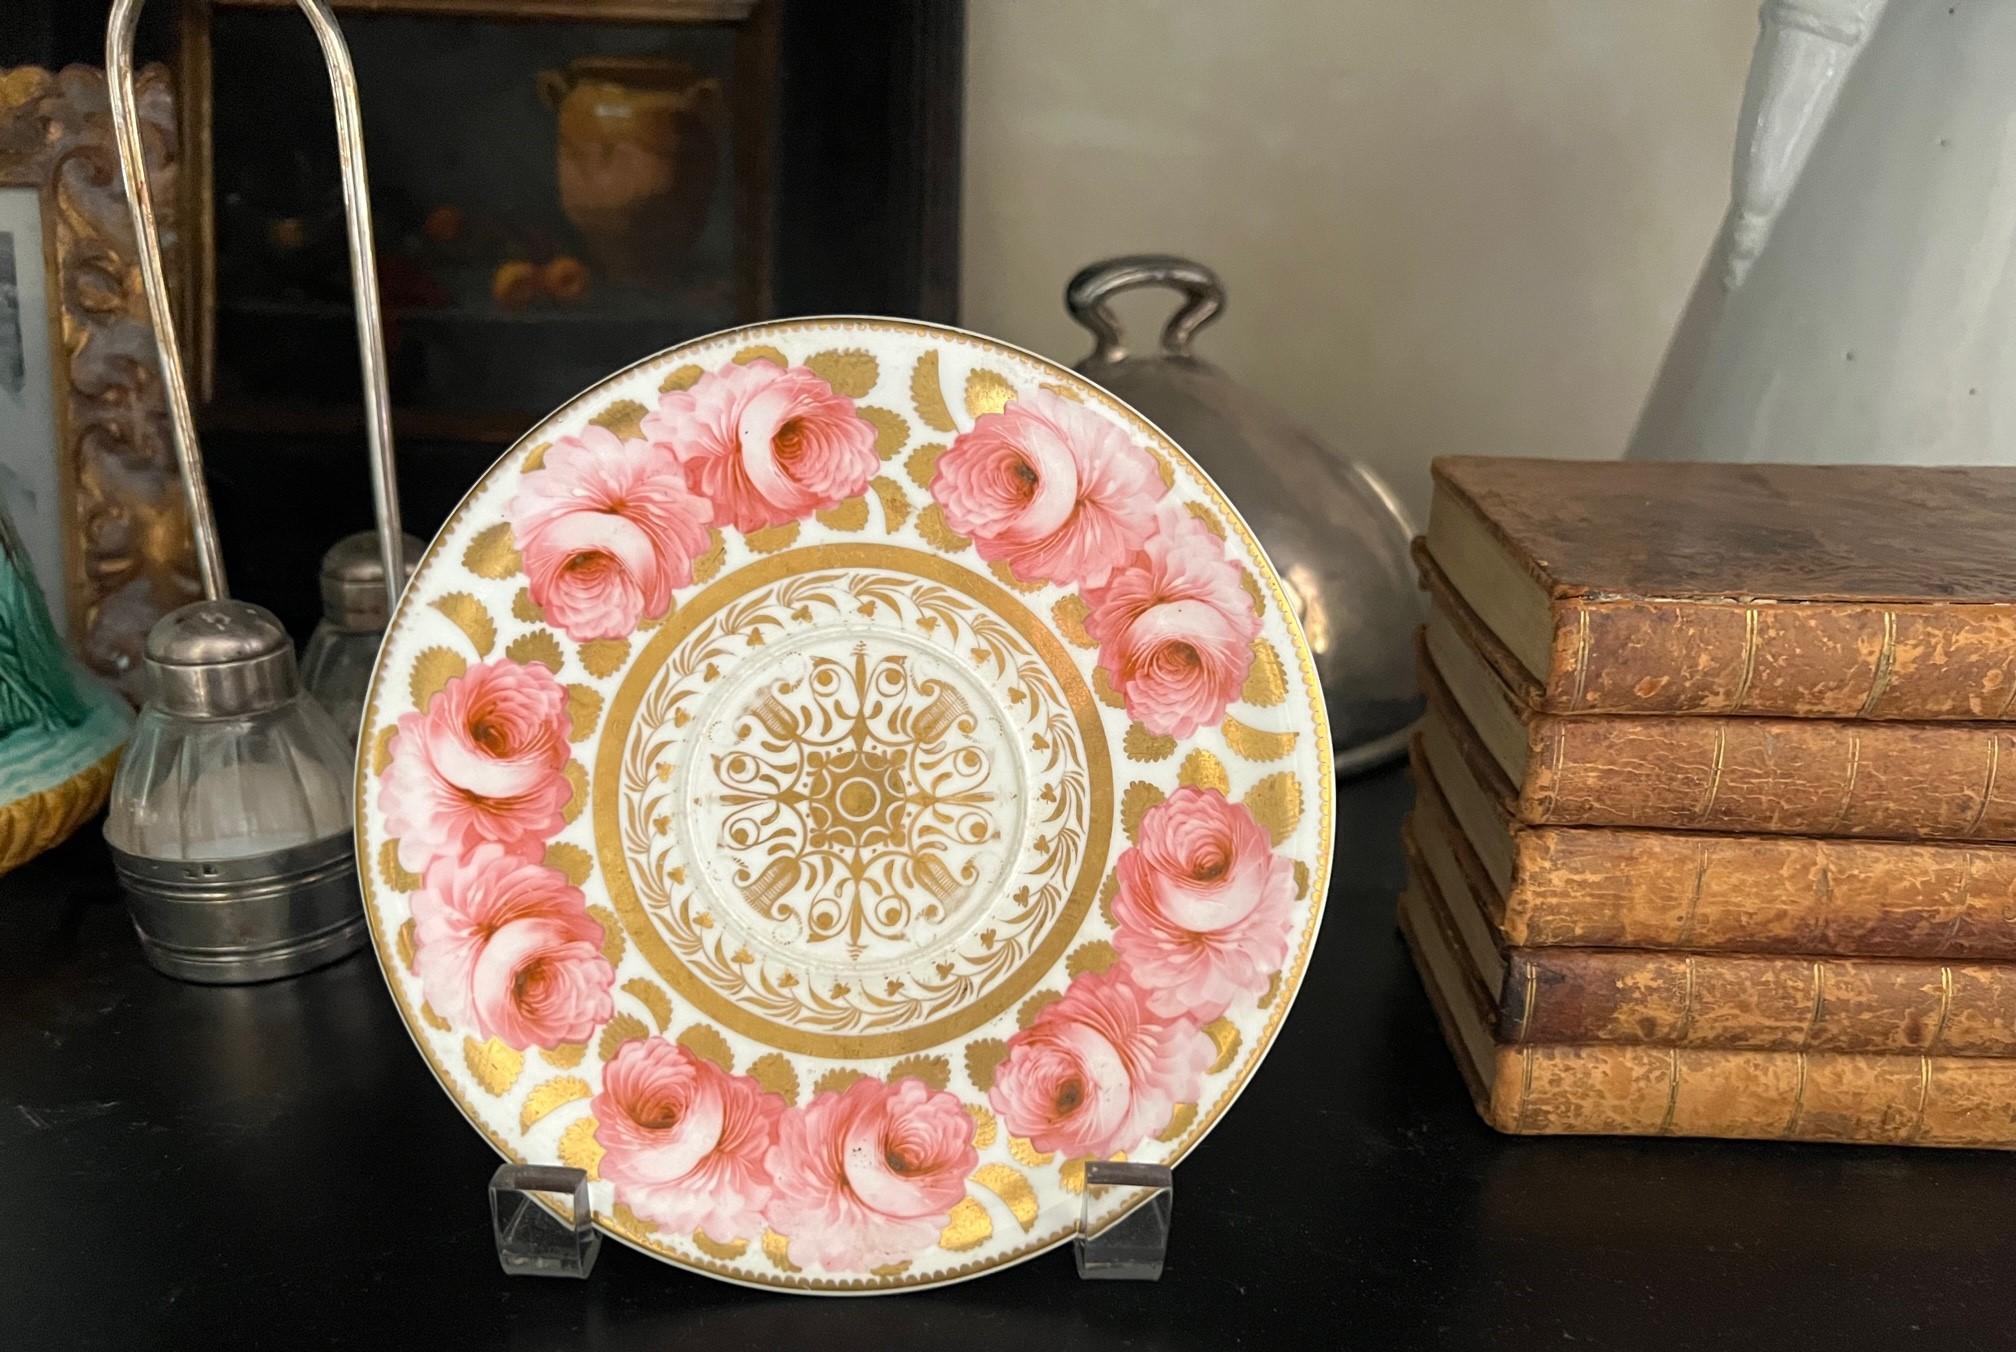 Regency period finely painted plate/saucer with pink roses and gilt leaves, made in England around 1820.